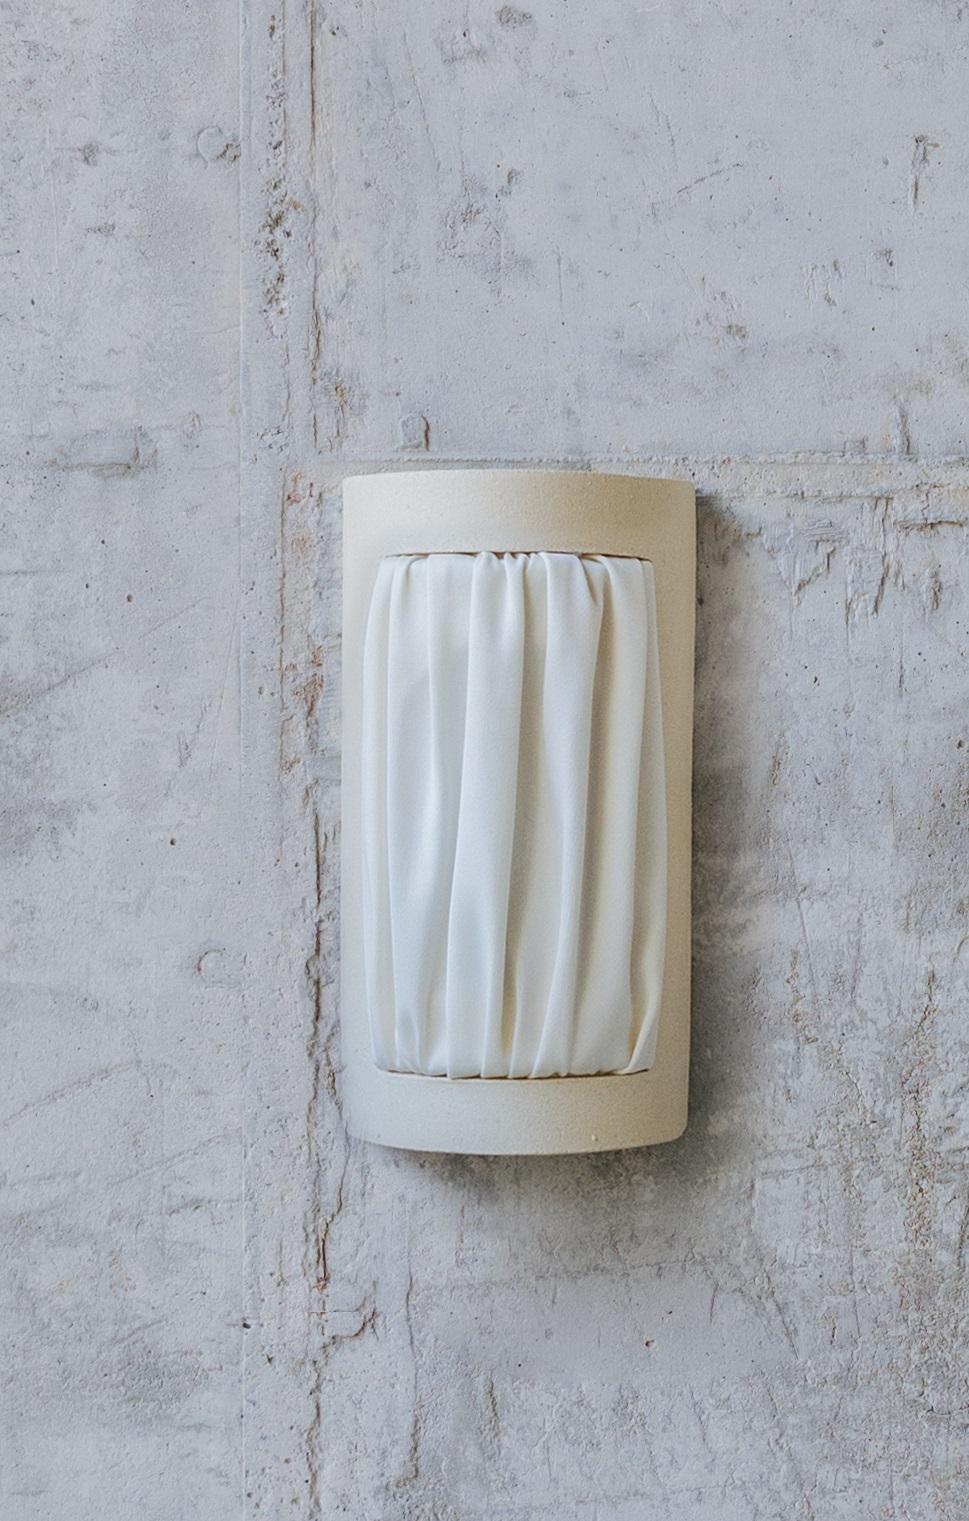 Almond Smaill Istos Wall Light by Lisa Allegra
Dimensions: D 7.5 x W 11.5 x H 21 cm.
Materials: Piece in ceramic and Dedar fireproofed fabric color Ivory.

Also available in different colored fabric: ivory, nude, salvia, senape or beige. Please